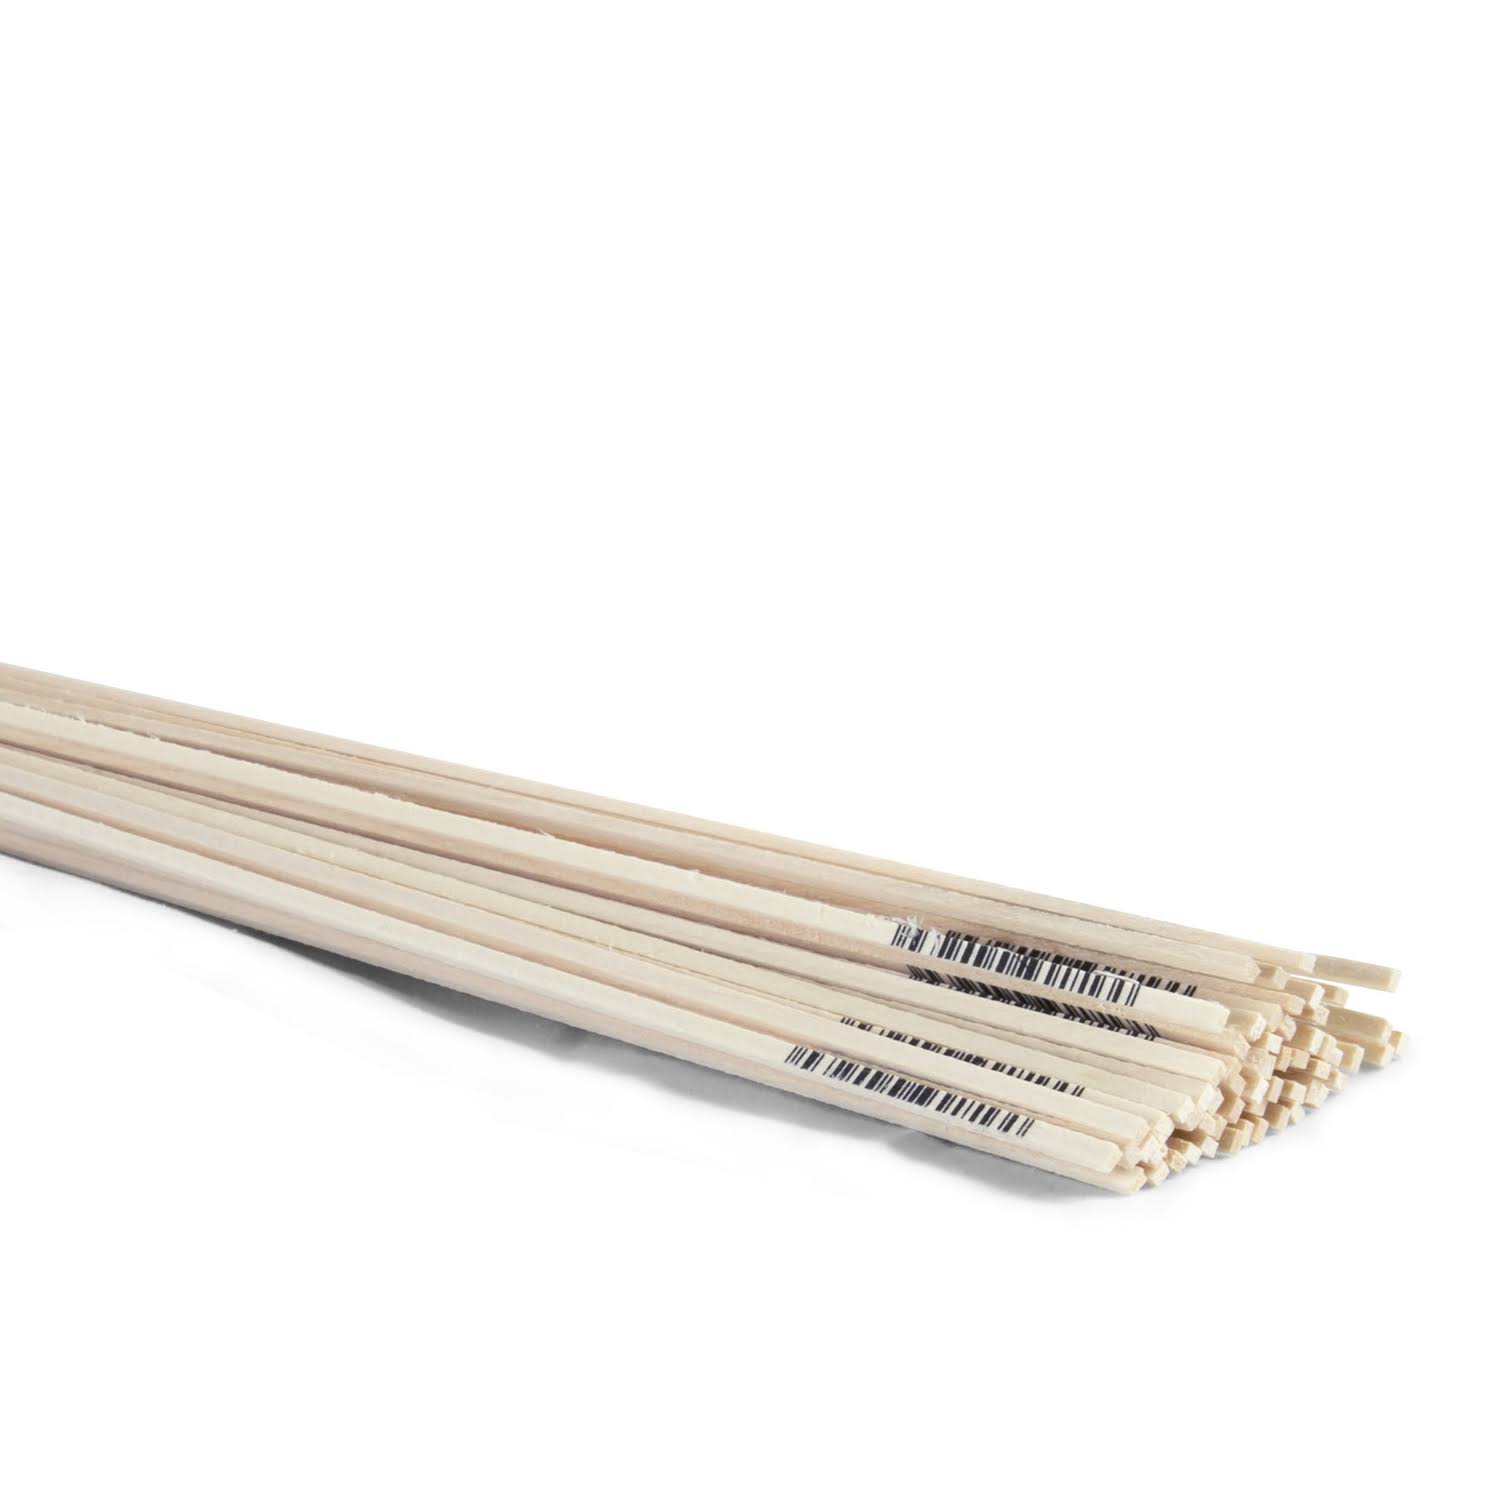 MIDWEST PRODUCTS 4023 BASSWOOD STRIP 1/16X3/32X24